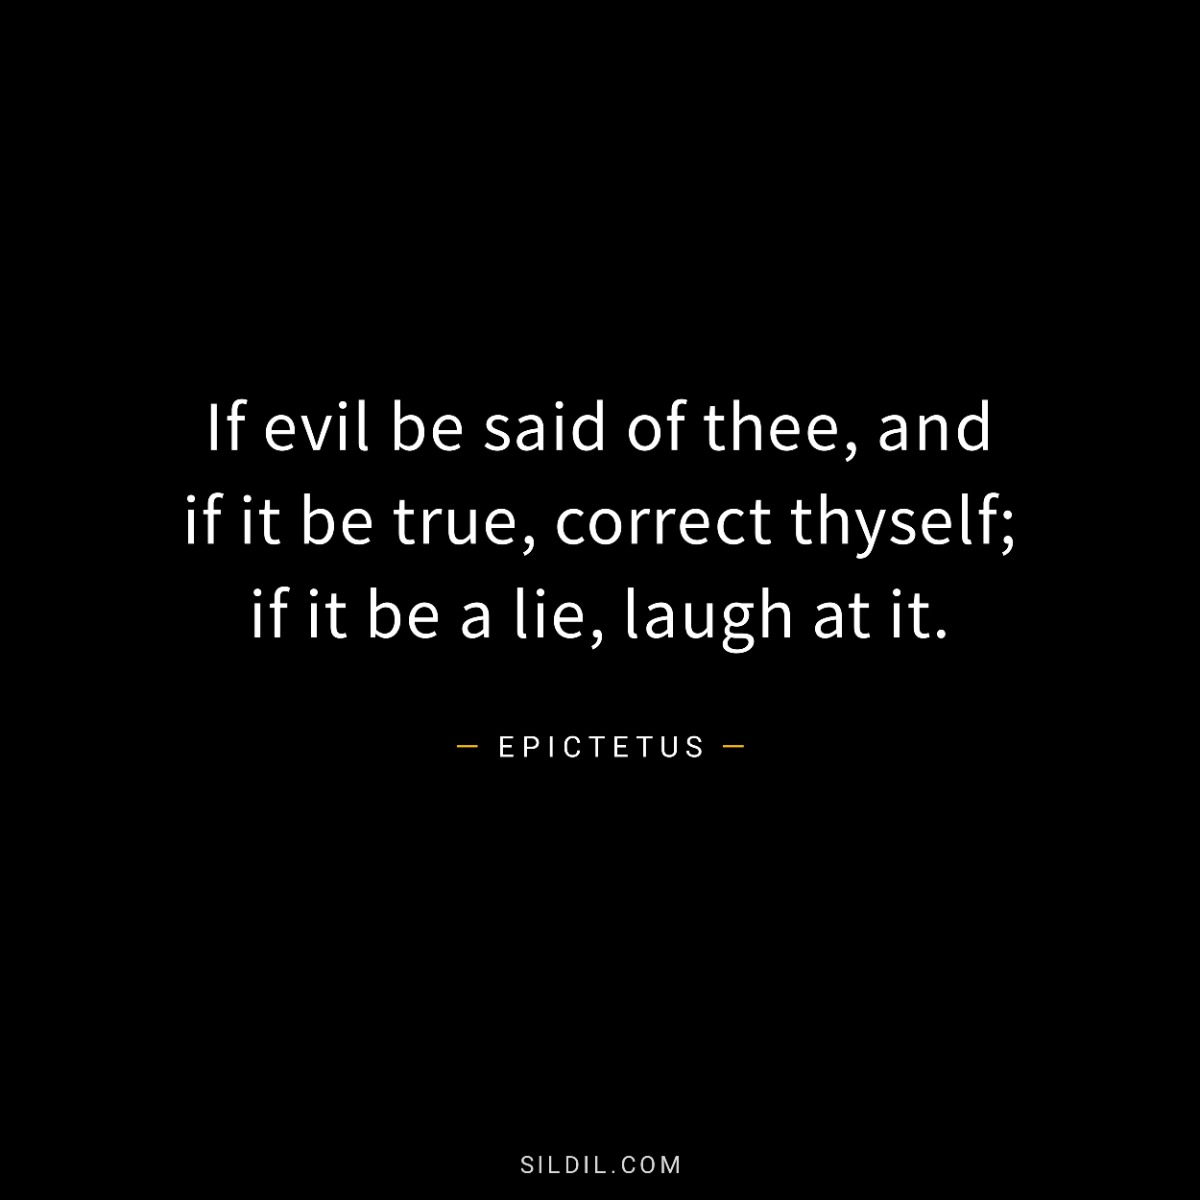 If evil be said of thee, and if it be true, correct thyself; if it be a lie, laugh at it.